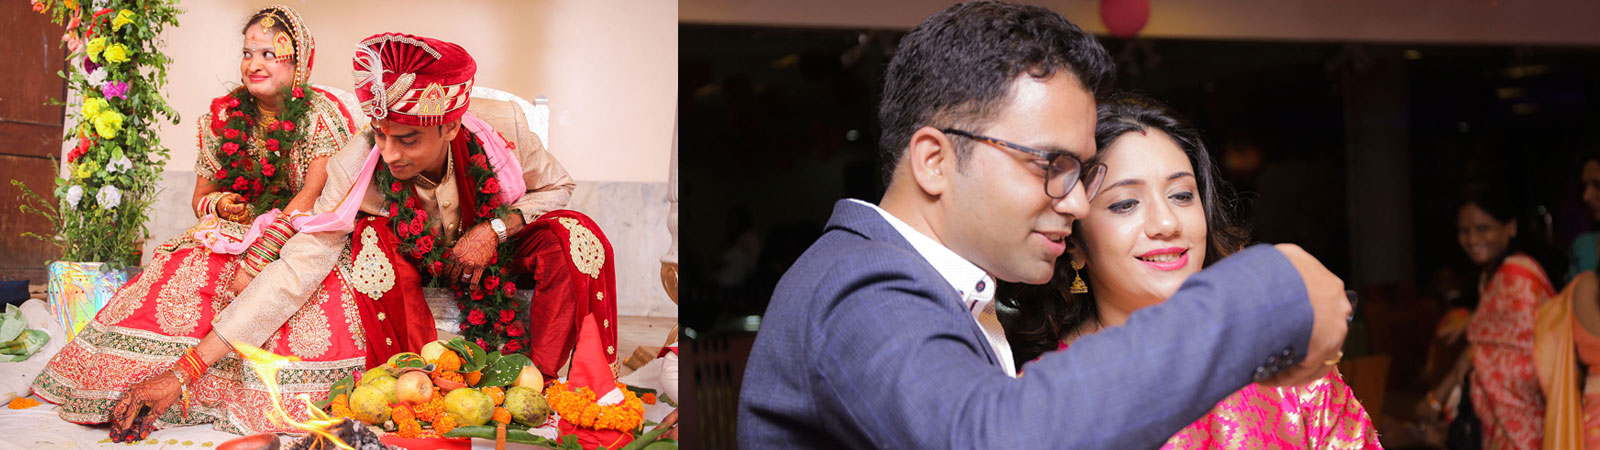 Candid Photography Services in Ranchi